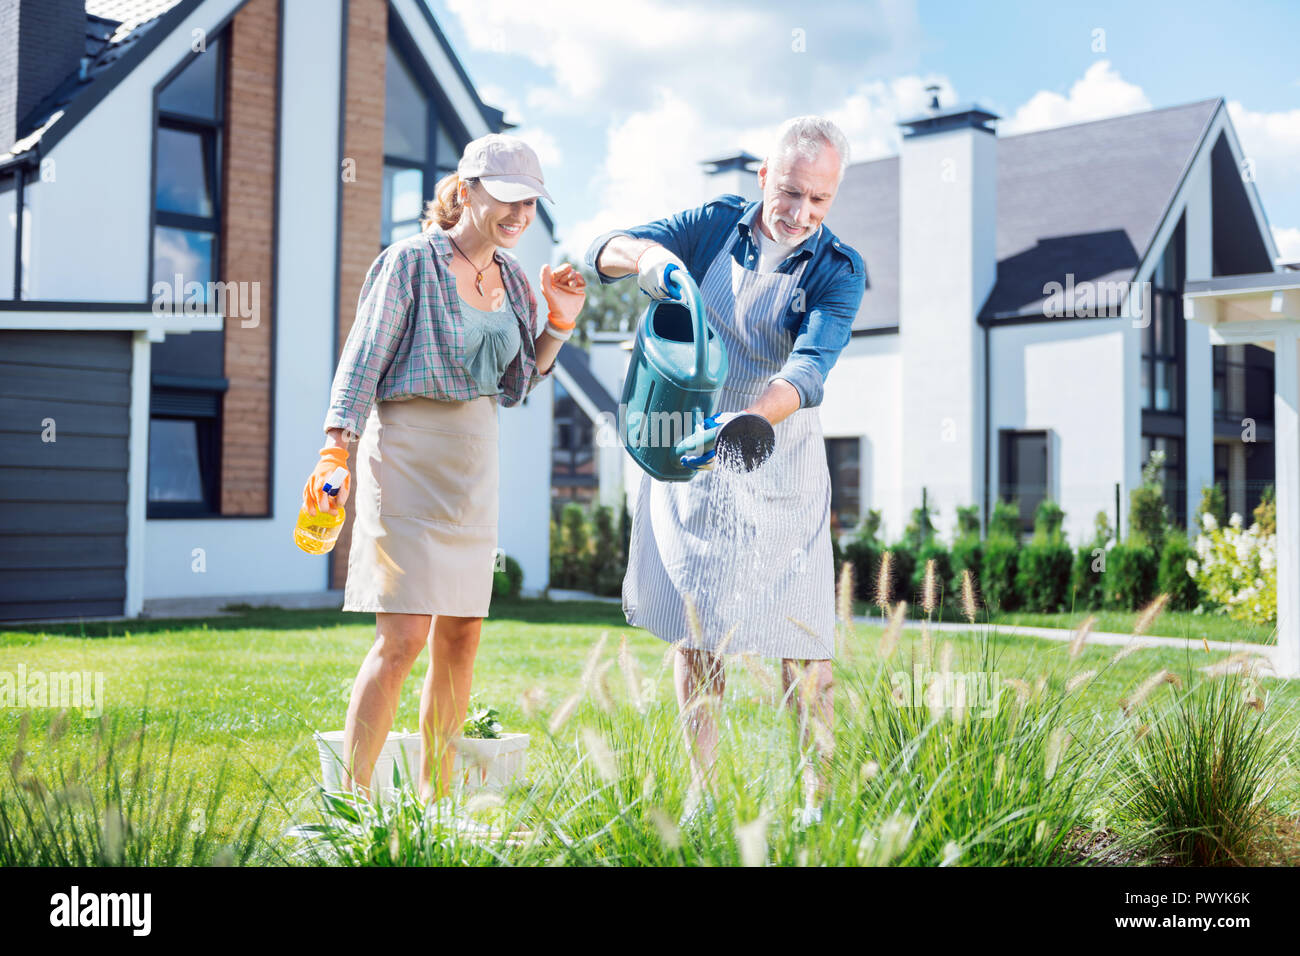 Bearded grey-haired man holding big garden sprinkler watering plants with wife Stock Photo